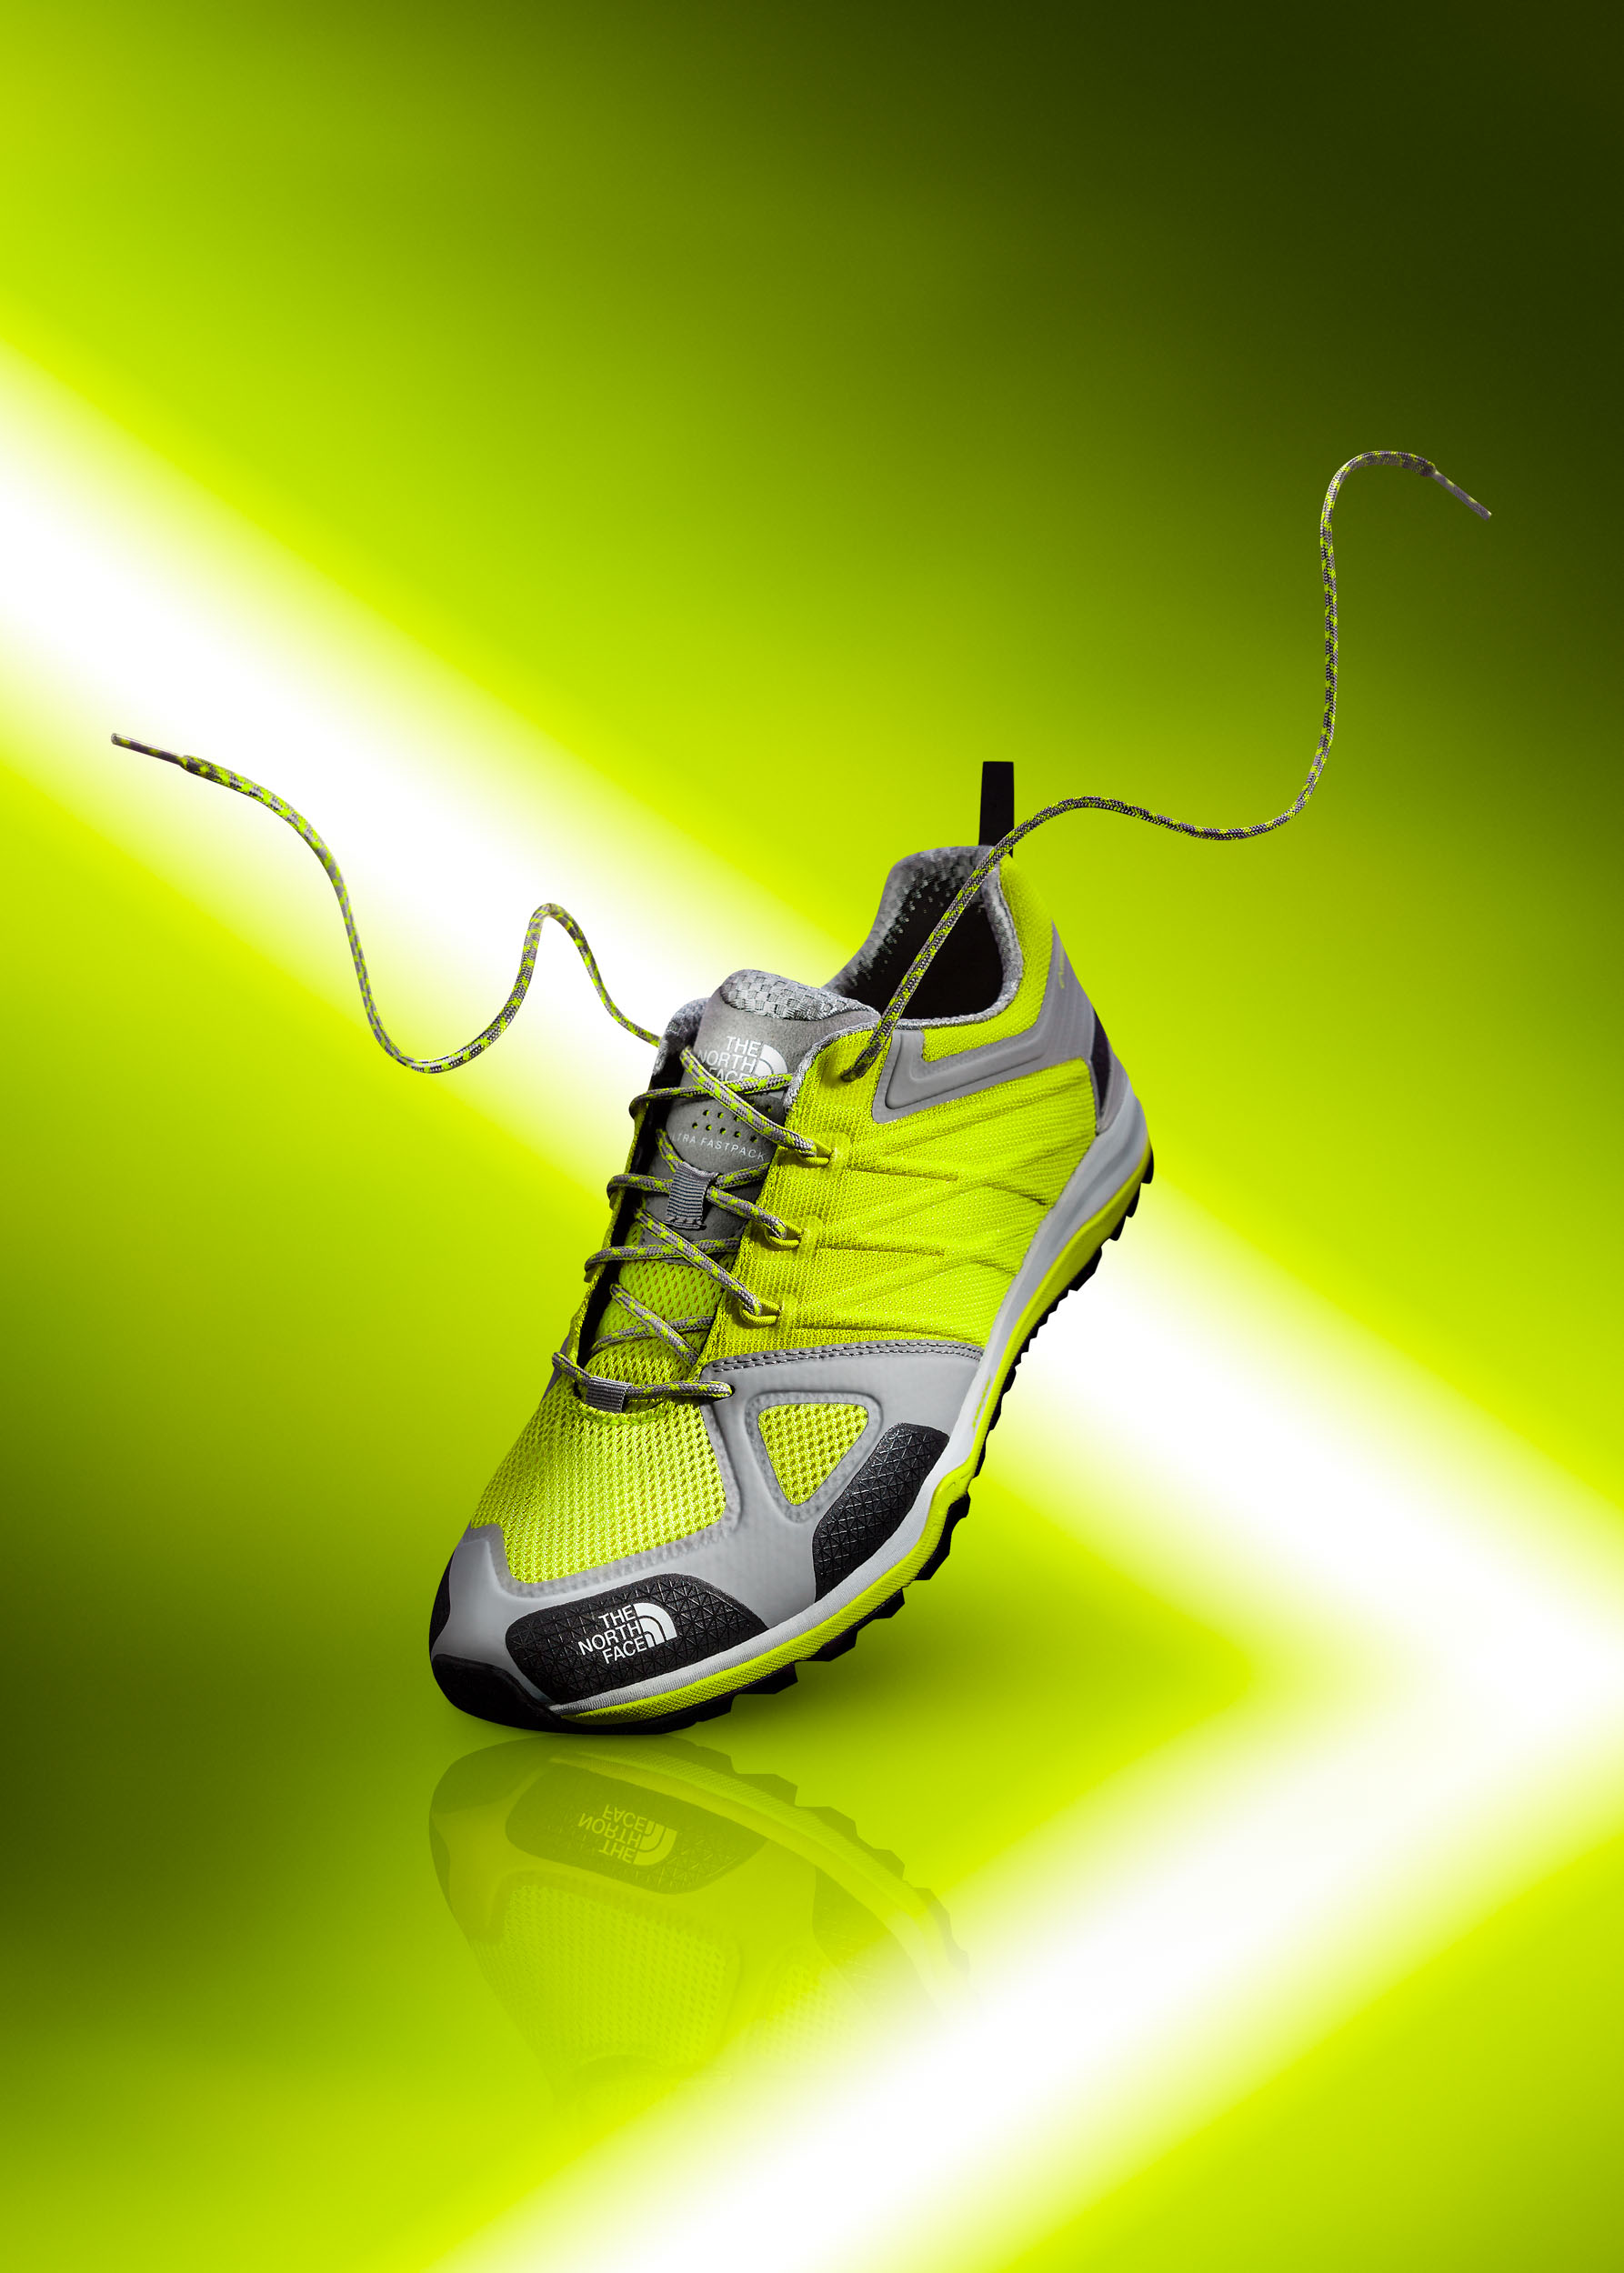 North Face Yellow Trainers | Commercial Product Shot 